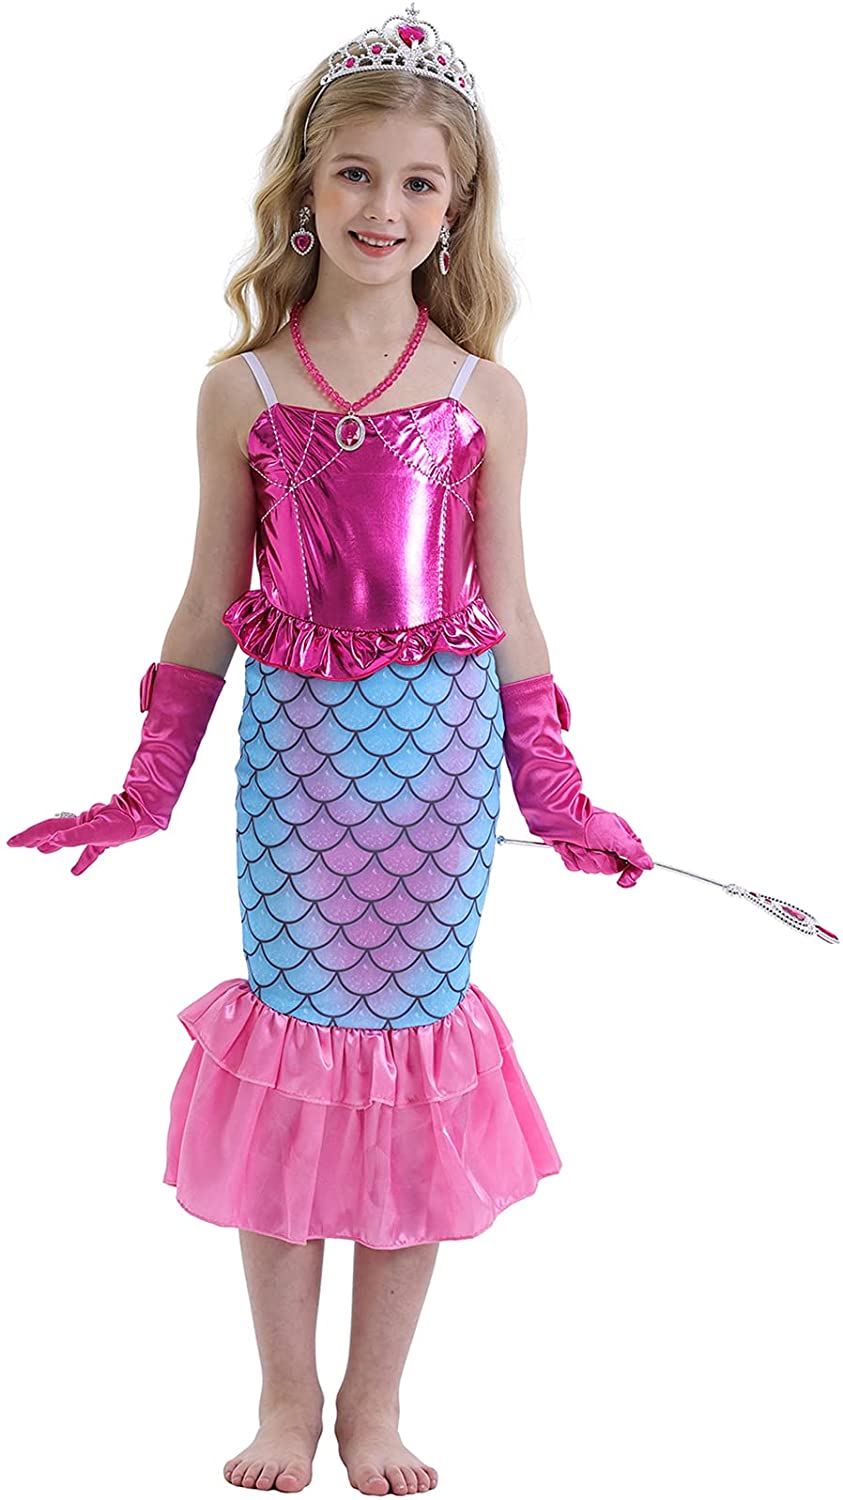 Girls Princess Dress up Costume Birthday Party Outfit 